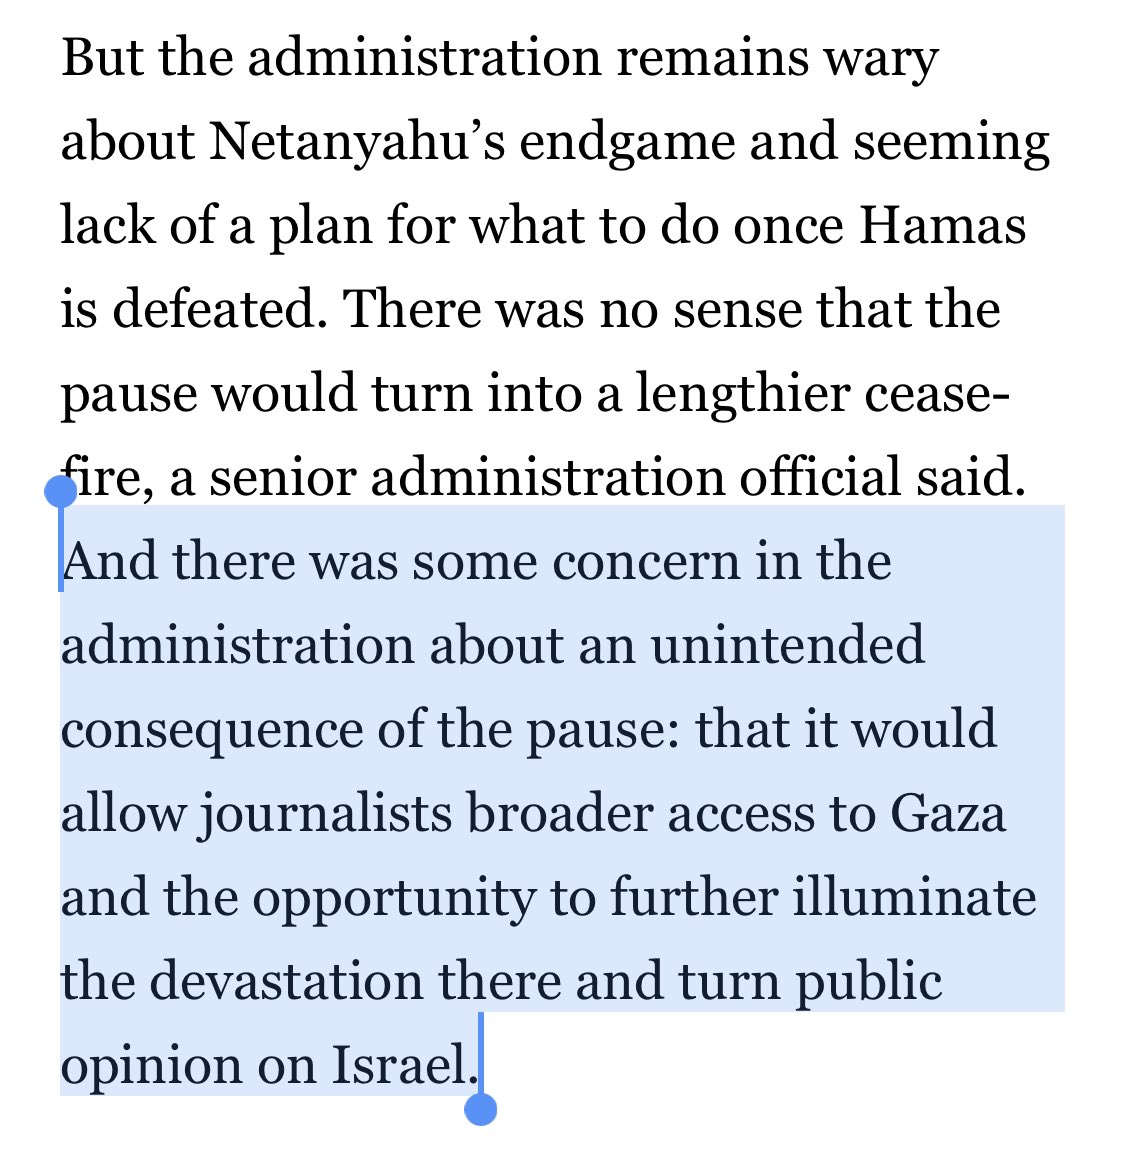 Biden admin was concerned a pause in Israeli bombardment would open Gaza up to more journalists to cover Israeli crimes & “turn public opinion”. Read that again. They strategized how to subvert coverage using Palestinian lives. Then consider how Israel has killed 49 journalists.